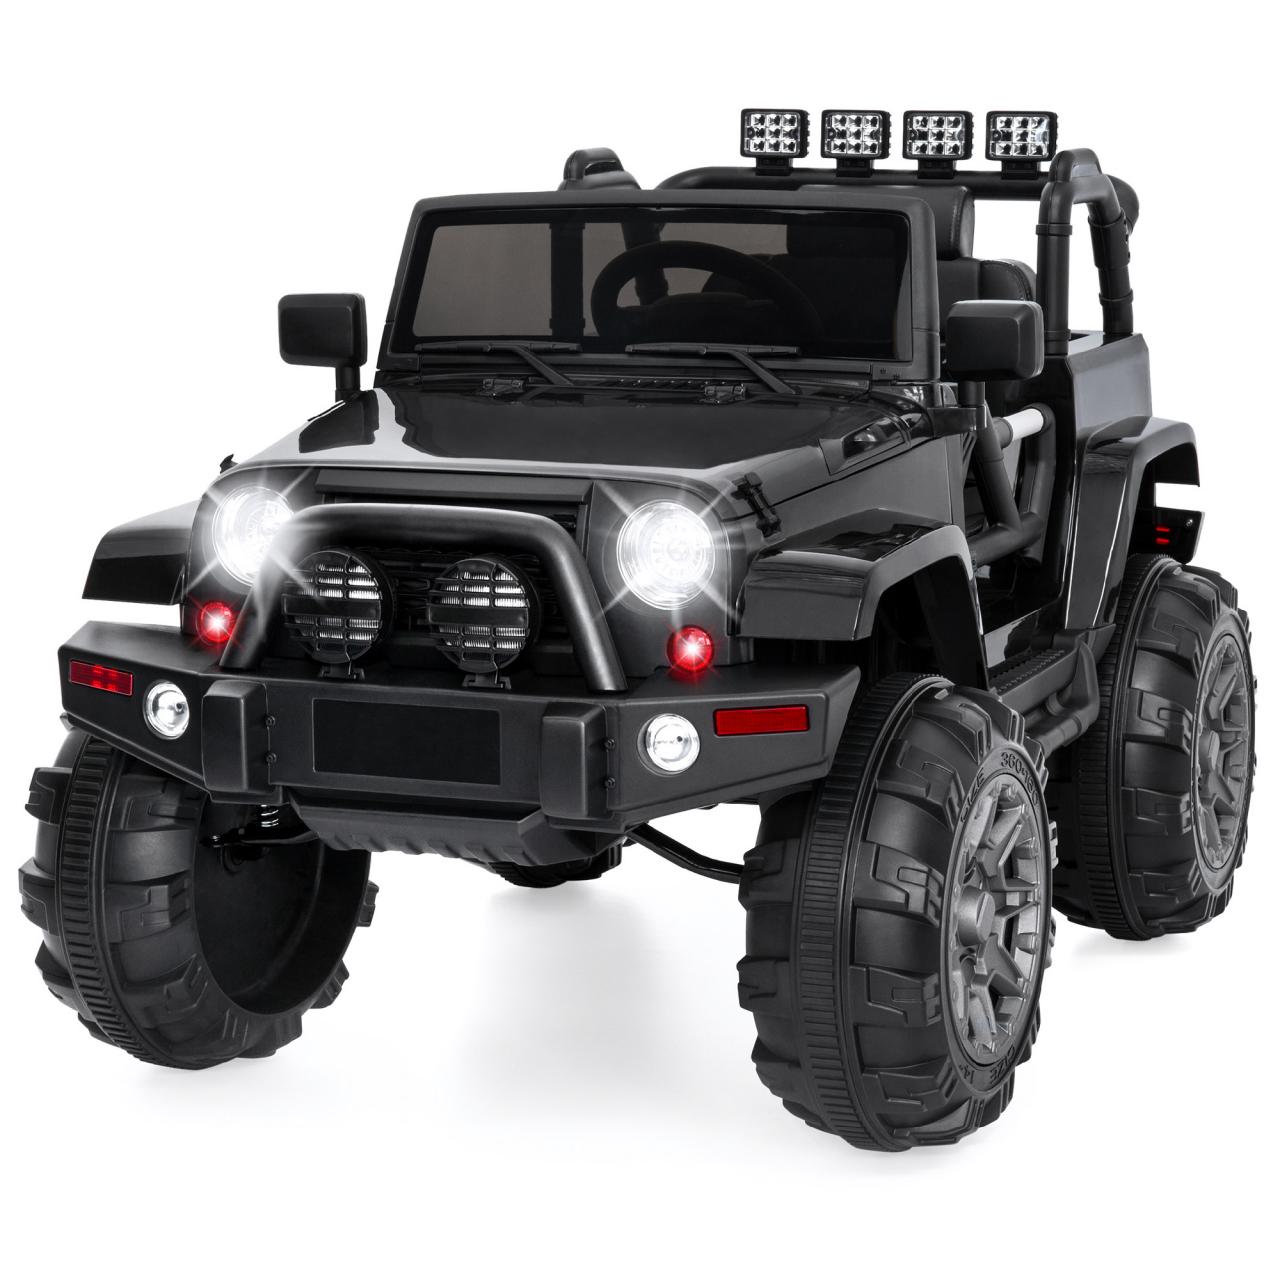 Buy Best Choice Products Kids 12V Ride On Truck, Battery Powered Toy Car w/  Spring Suspension, Remote Control, 3 Speeds, LED Lights, Bluetooth - Black  Online in Turkey. B072865HYJ